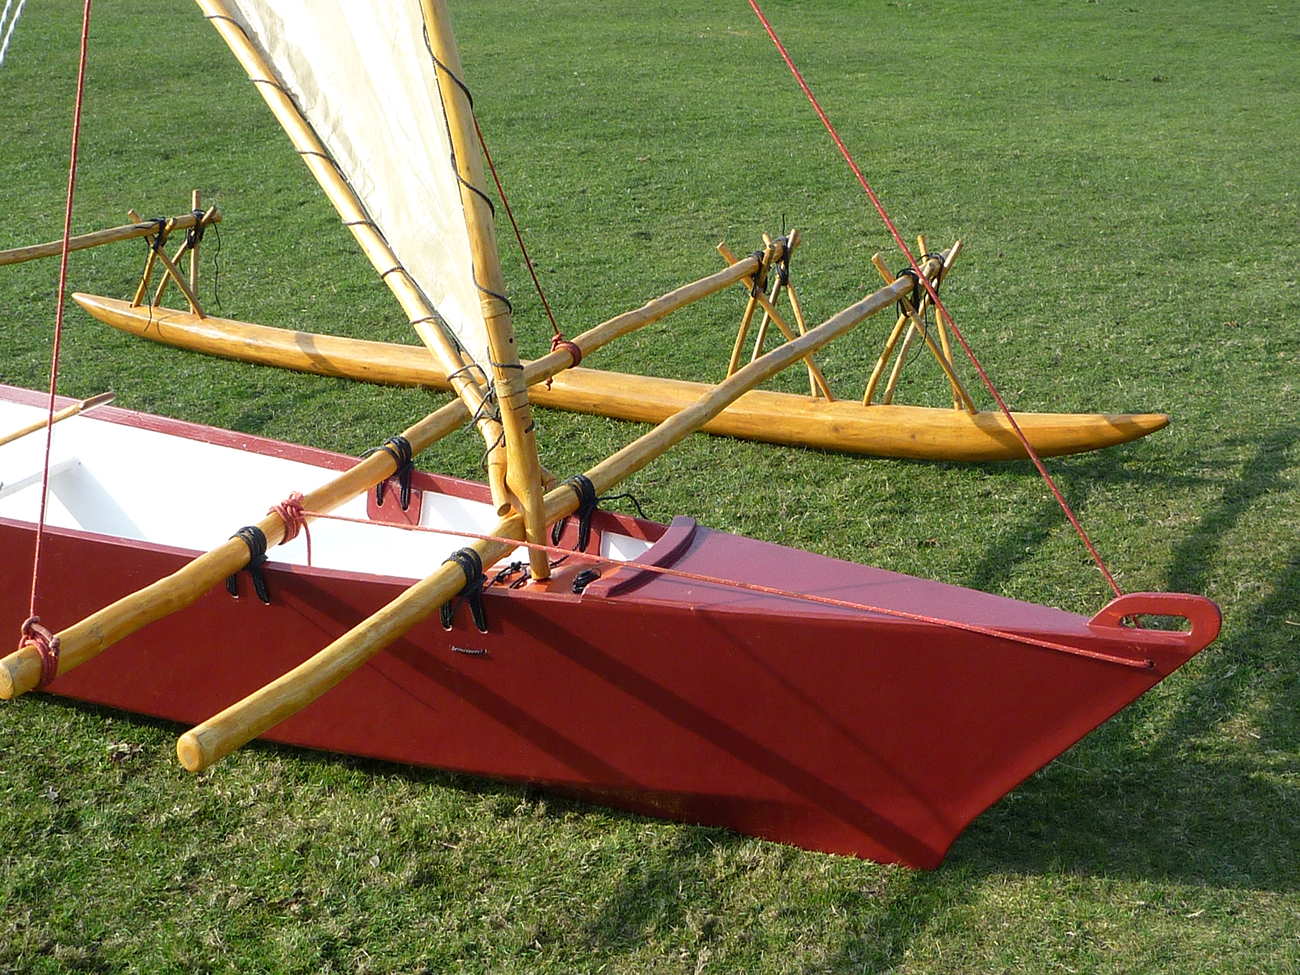 Dark red Melanesia outrigger canoe on land, close up of bow and float